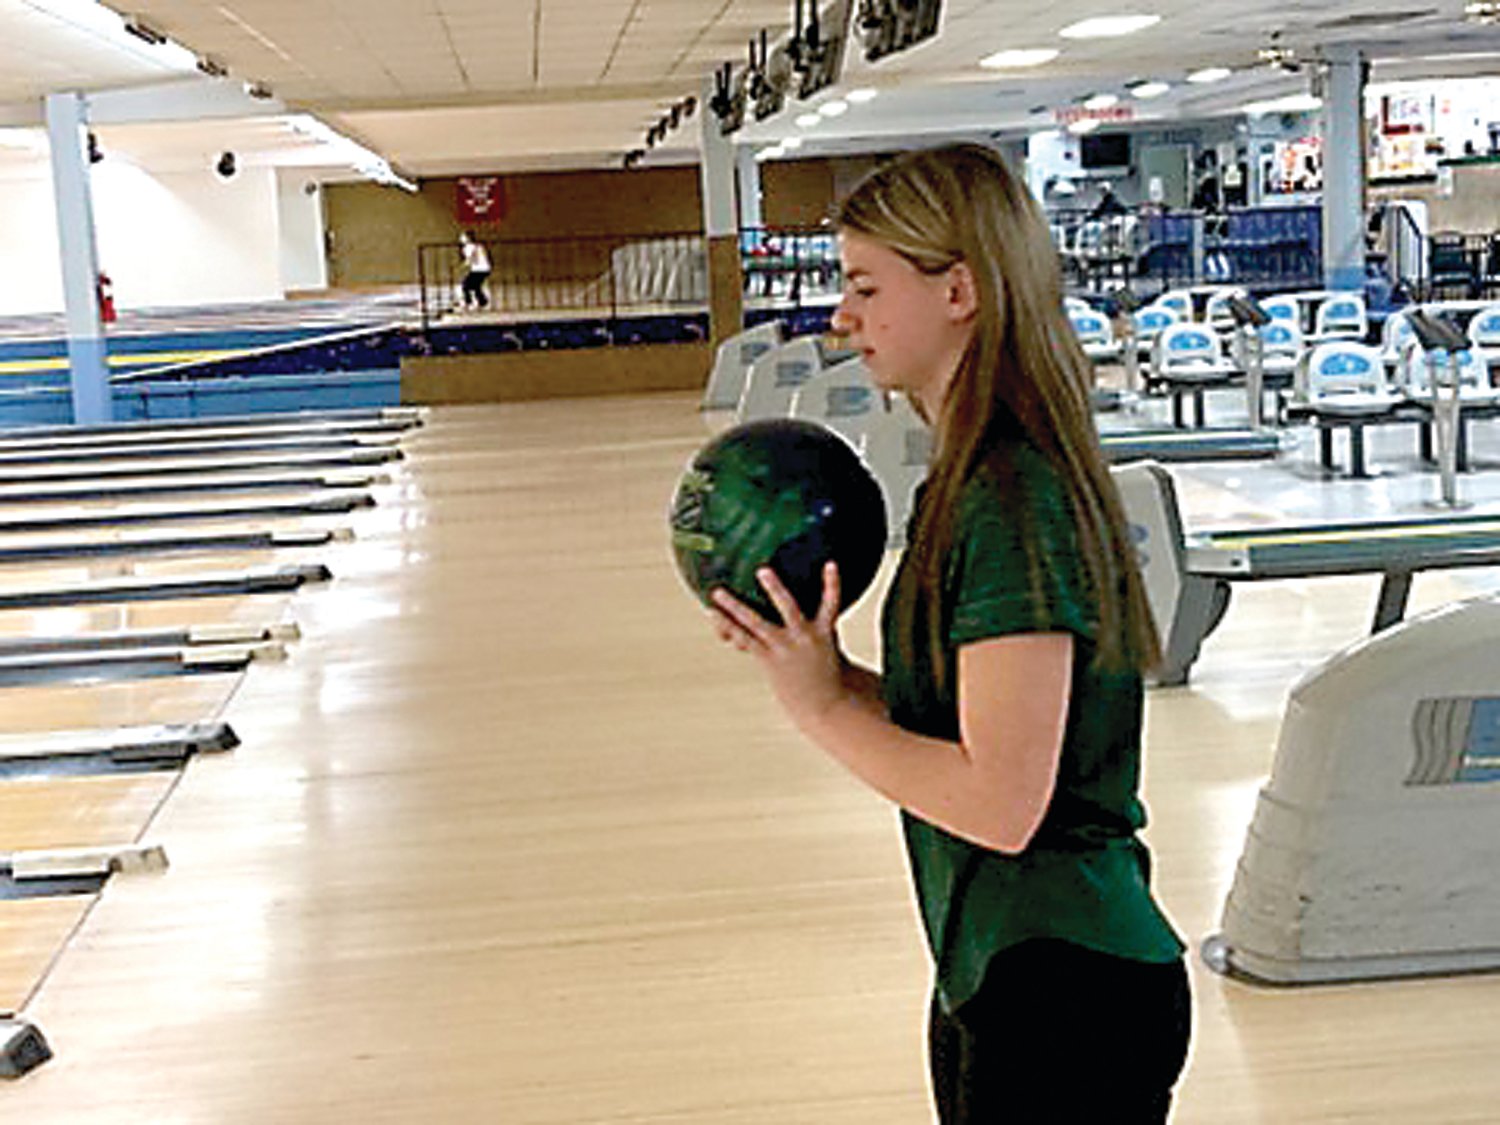 Pennridge bowler Joie Mott concentrates before starting her approach during a recent session at Earl Bowl in Telford.